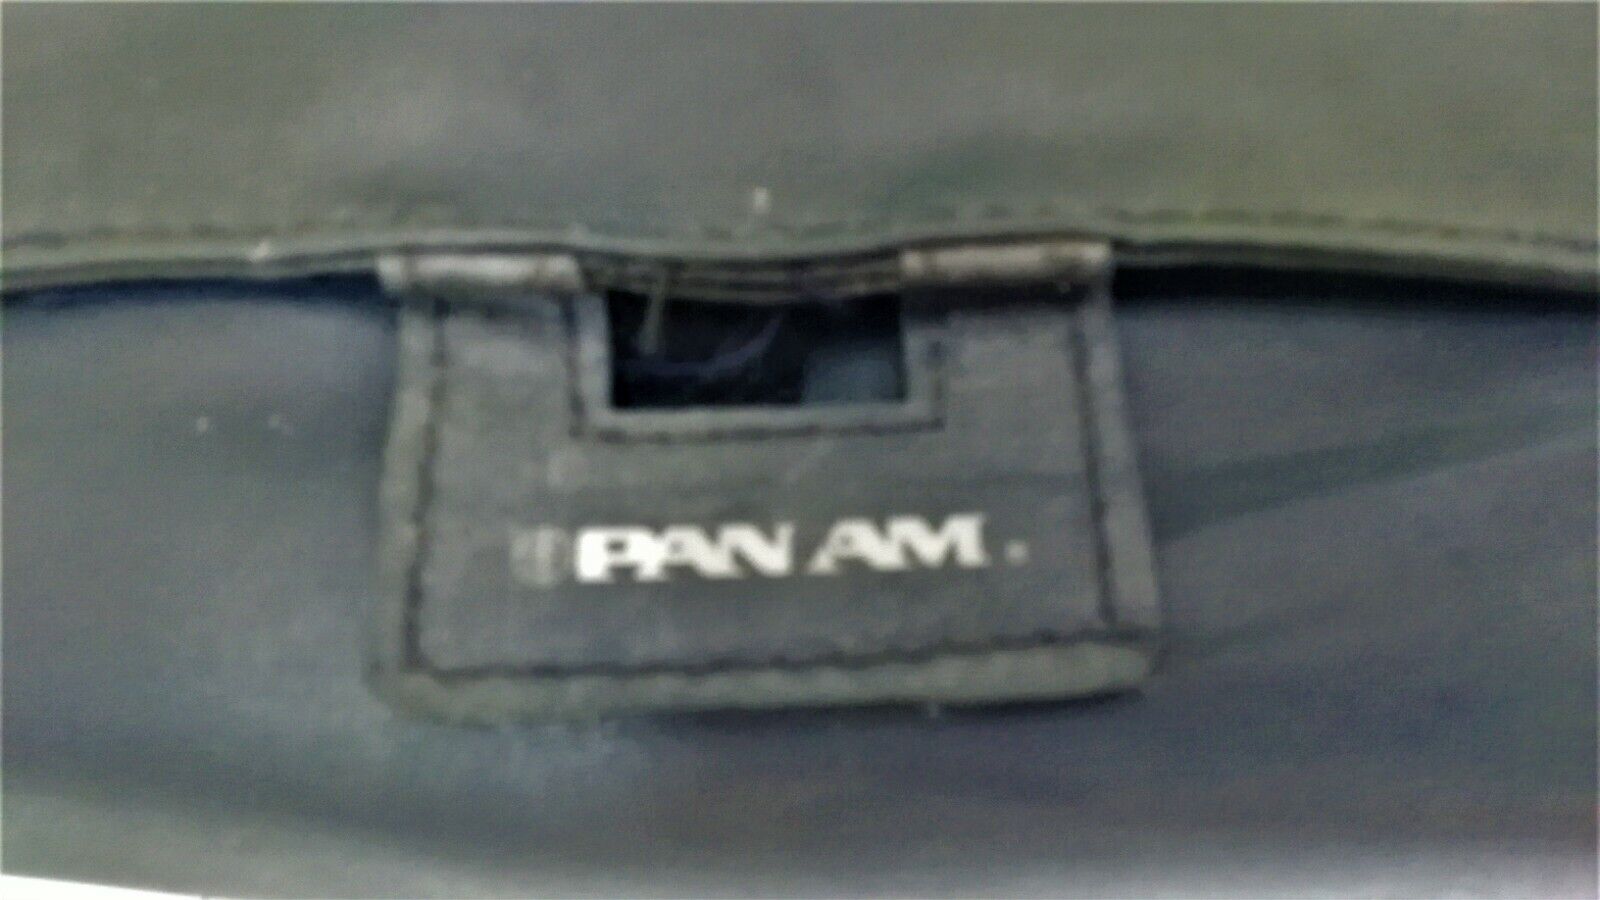 PAN AM VINTAGE NECESSAIRE FIRST CLASS AMENITY KIT TOILETRY BAG